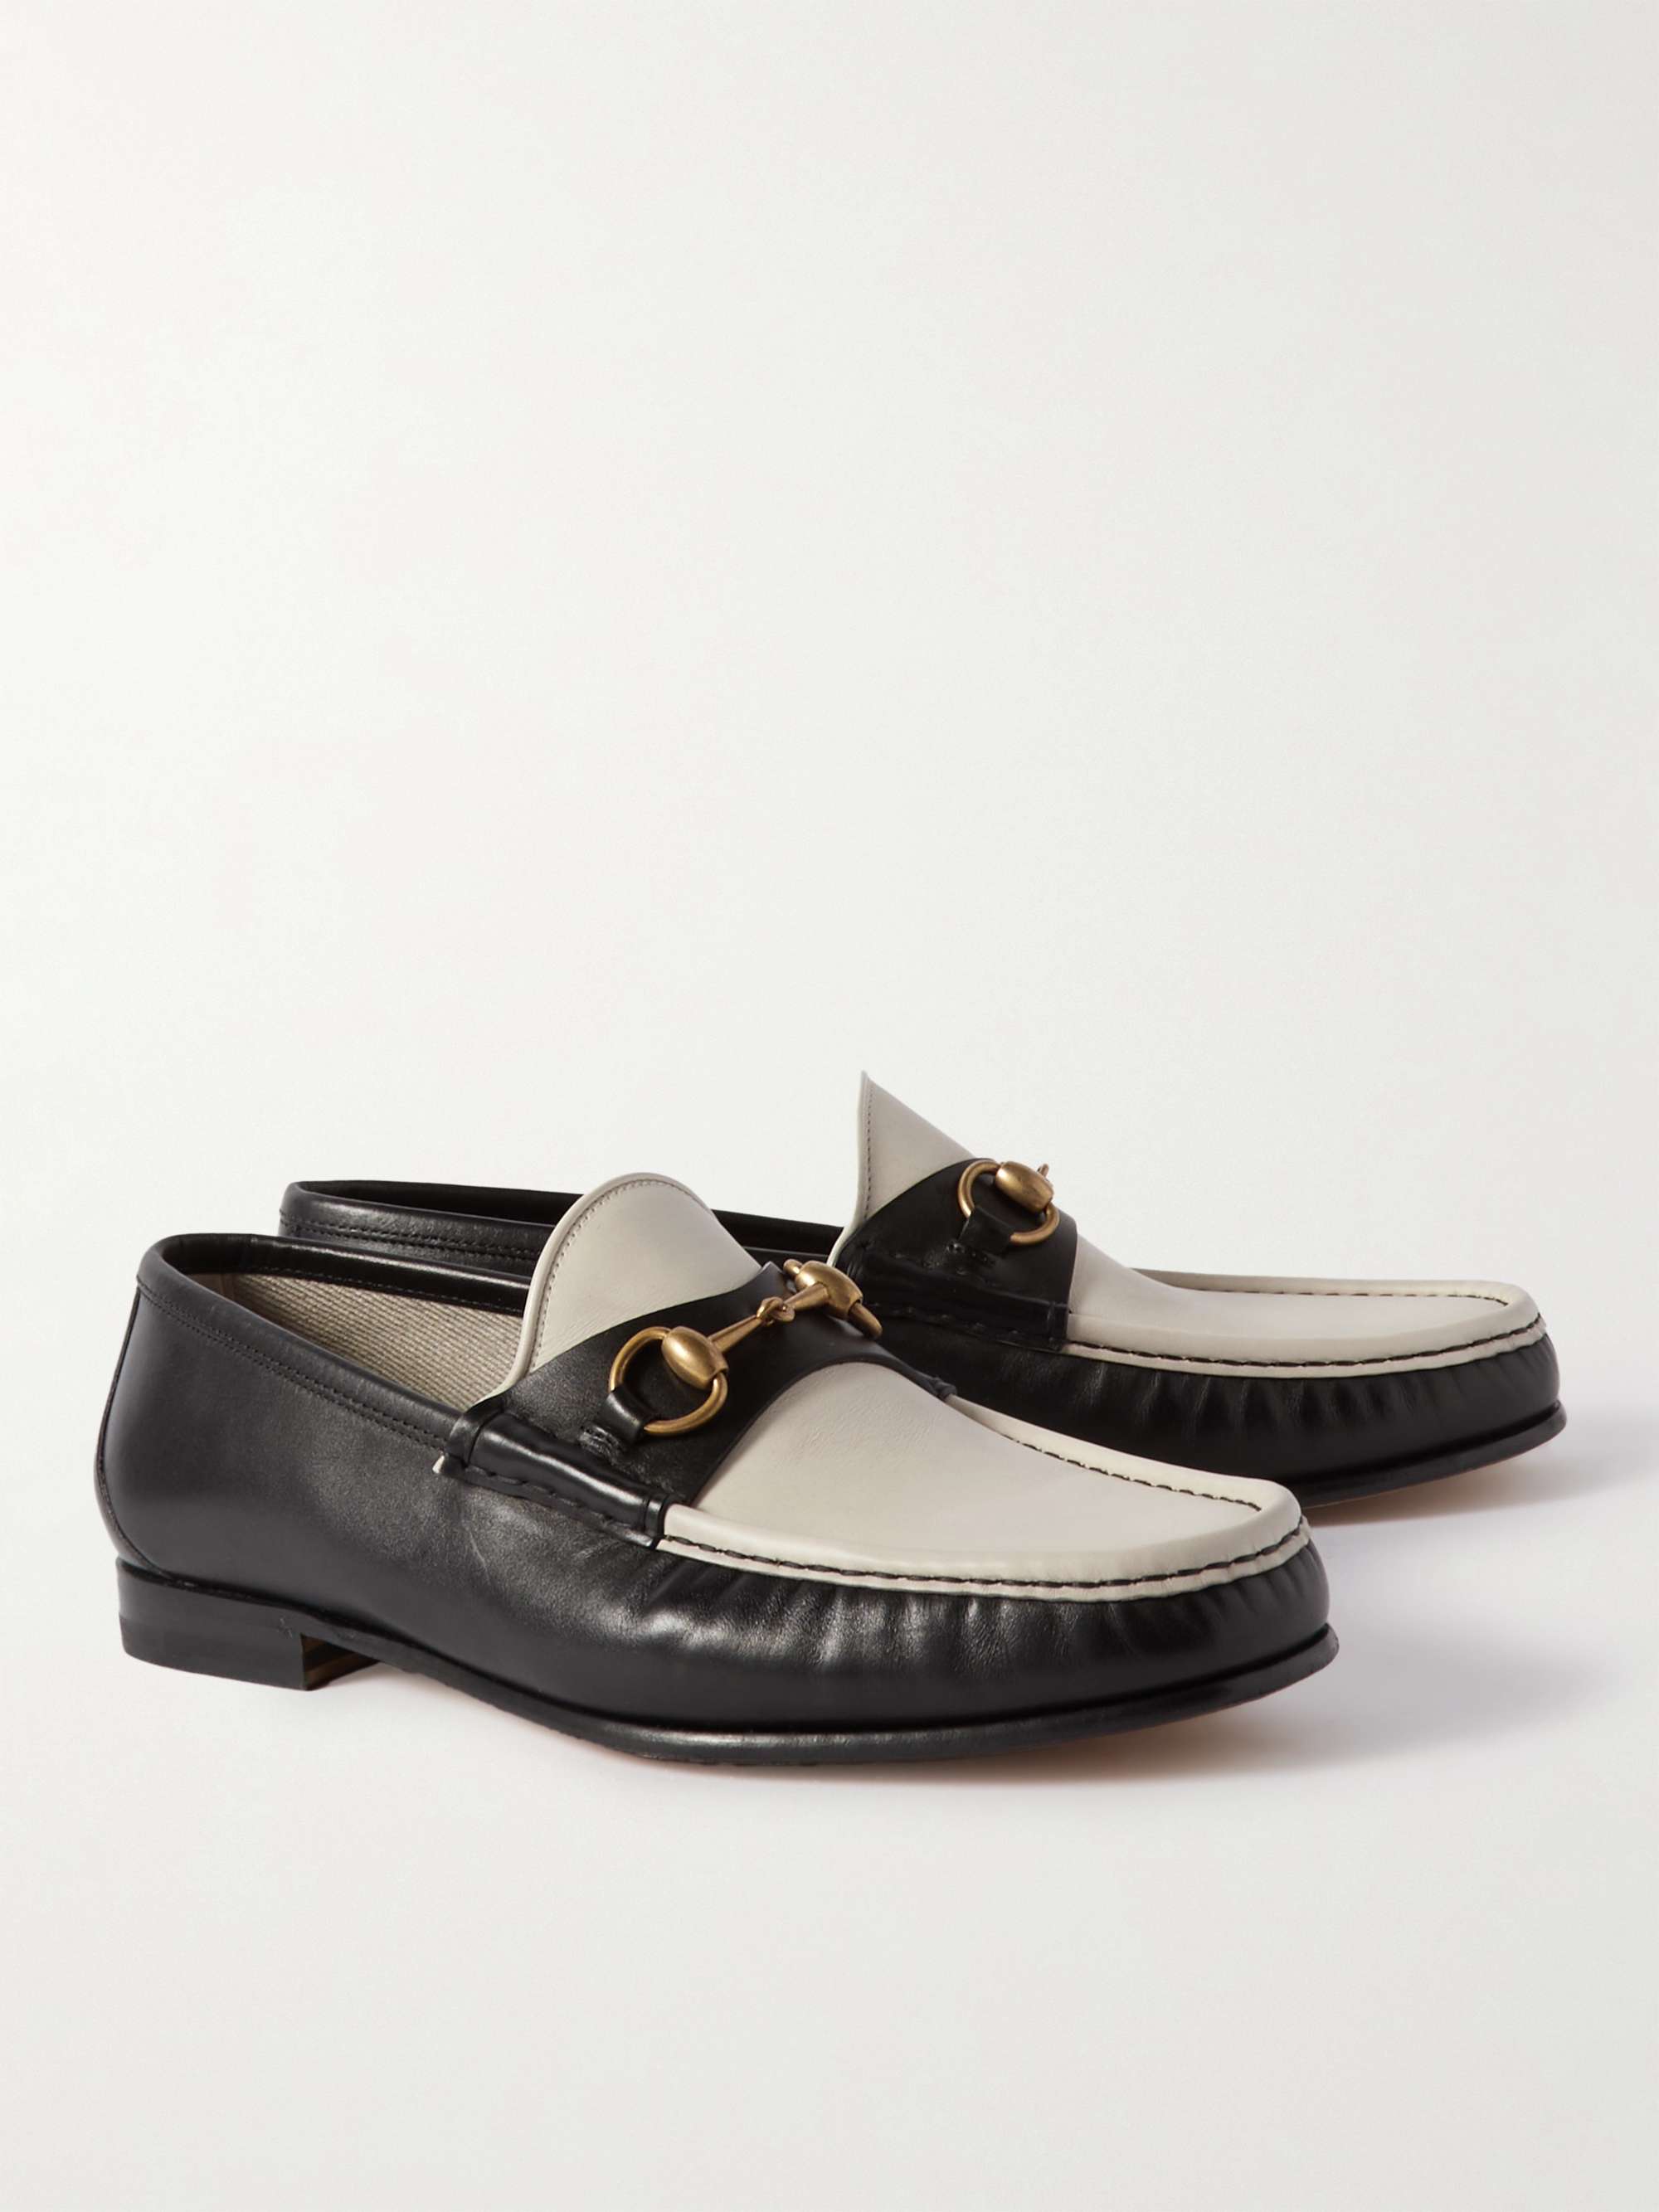 GUCCI Horsebit Two-Tone Leather Loafers | MR PORTER